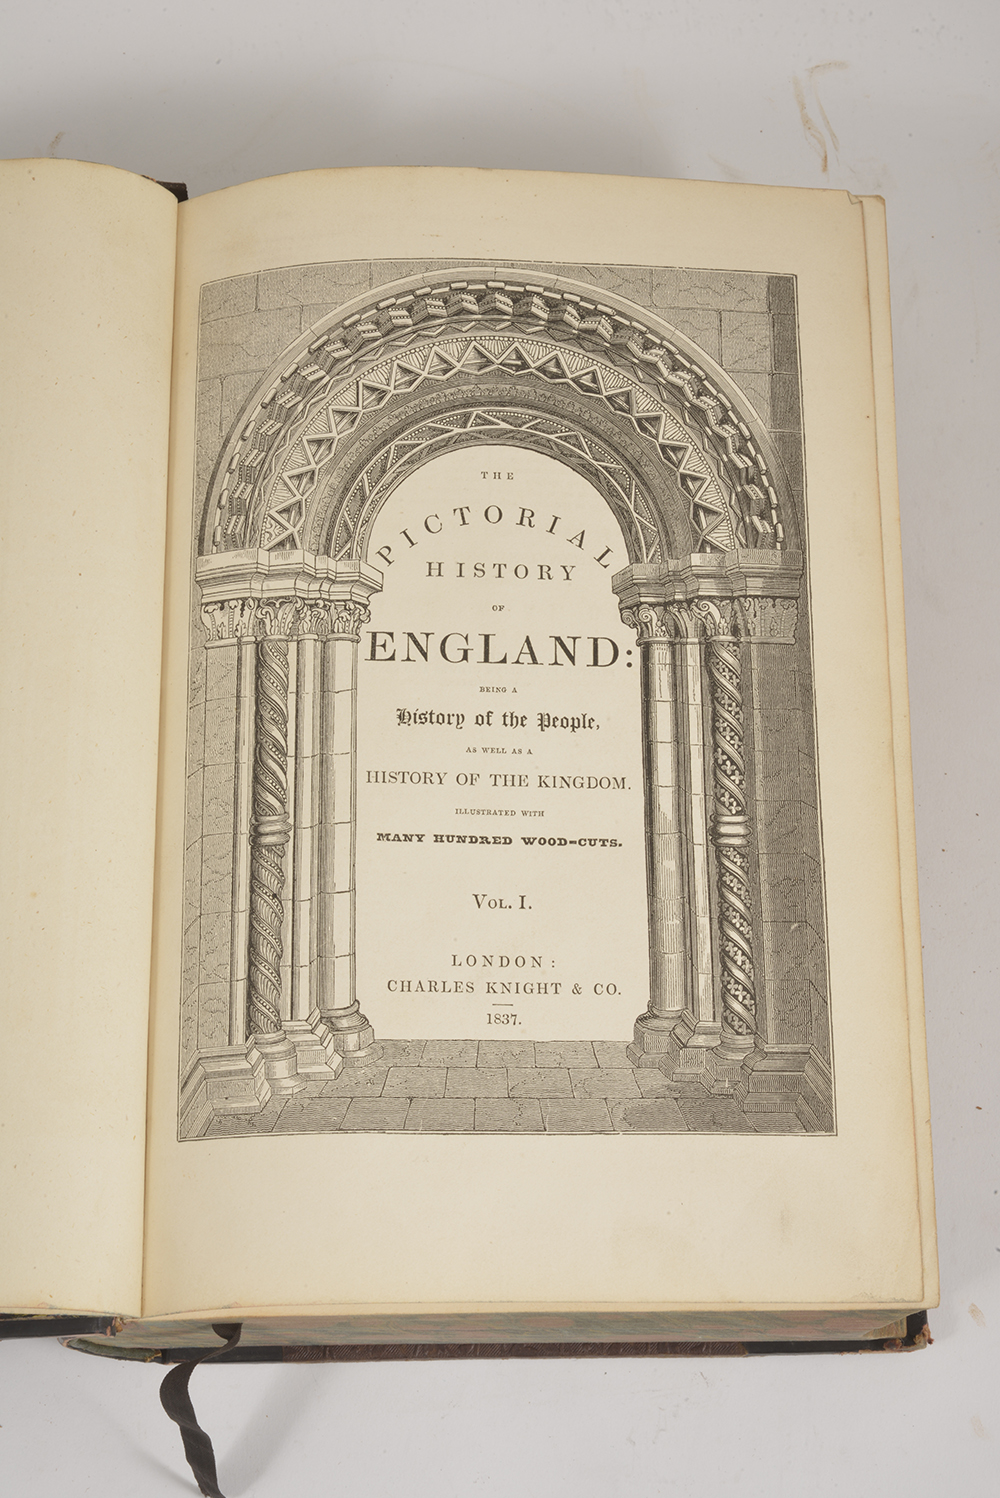 Charles Knight & Co; The Pictoral History of England, 1837, 4 Vols.Published by Charles Knight & - Image 2 of 3